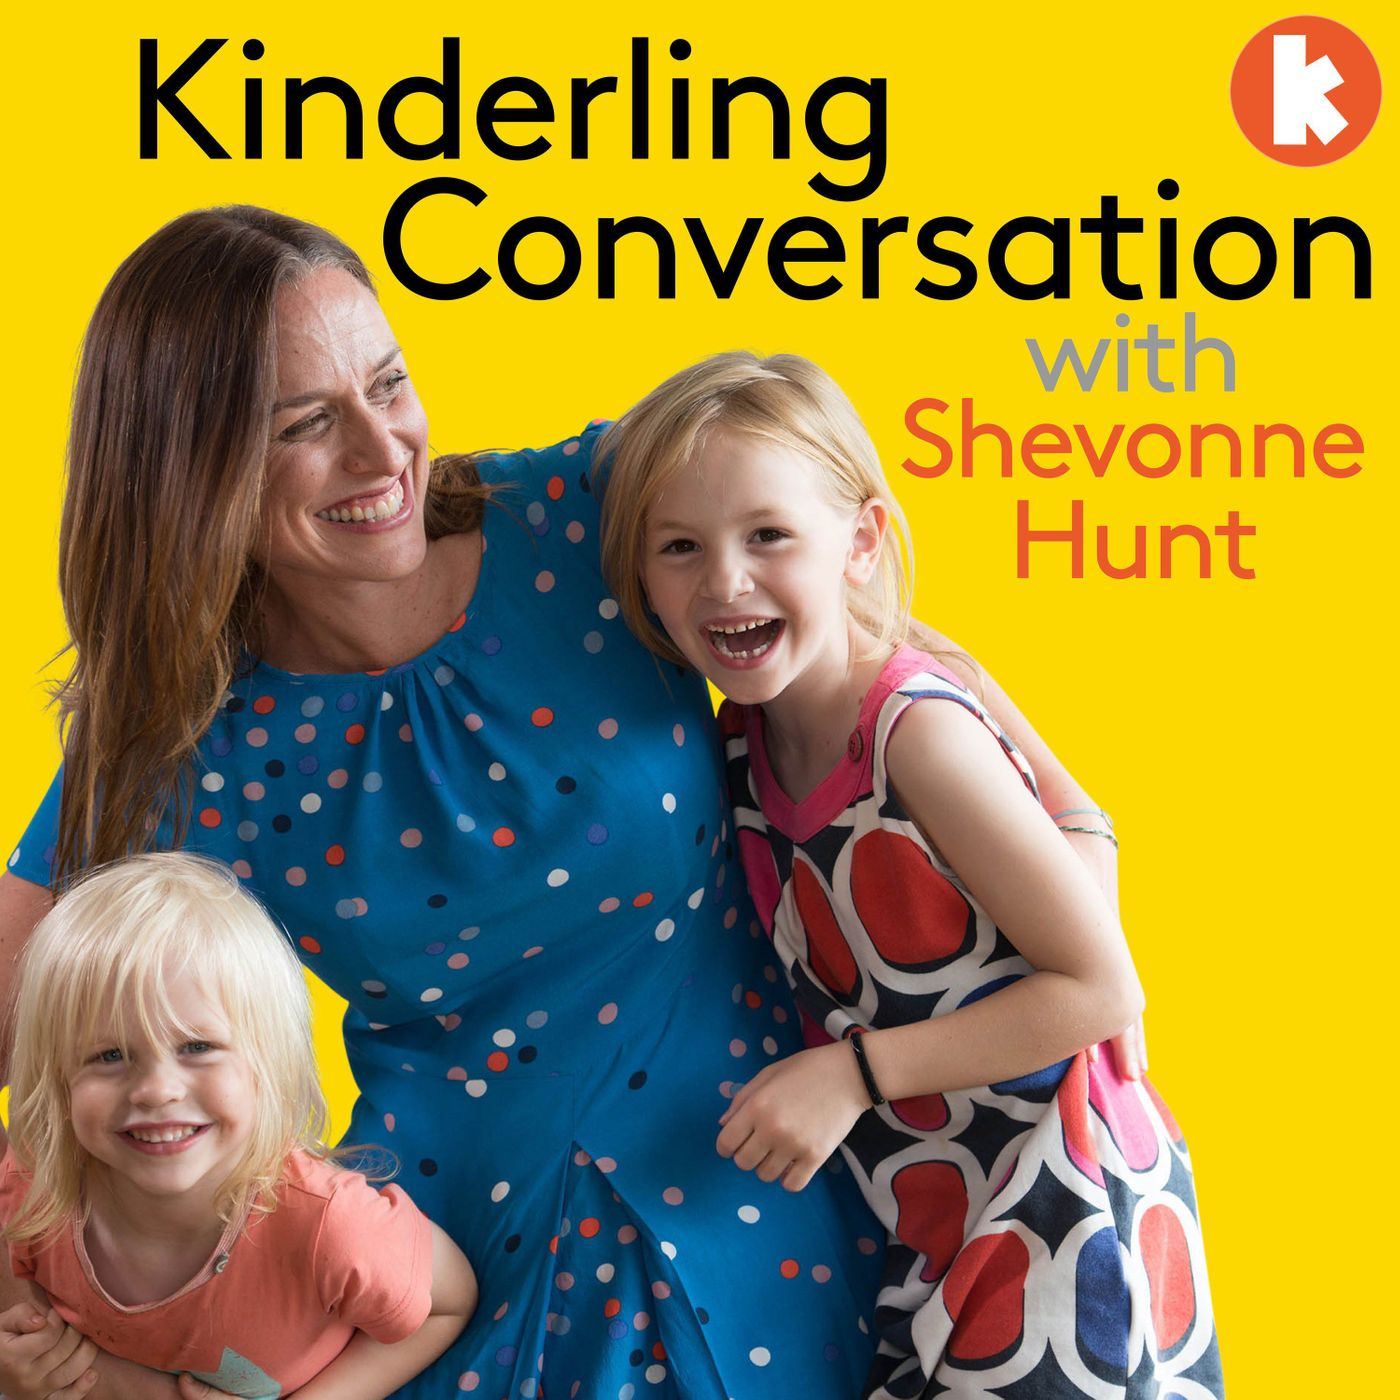 Kinderling Helpline: Cutlery, Night Feeds, Single Child Anti-social Behaviours And More